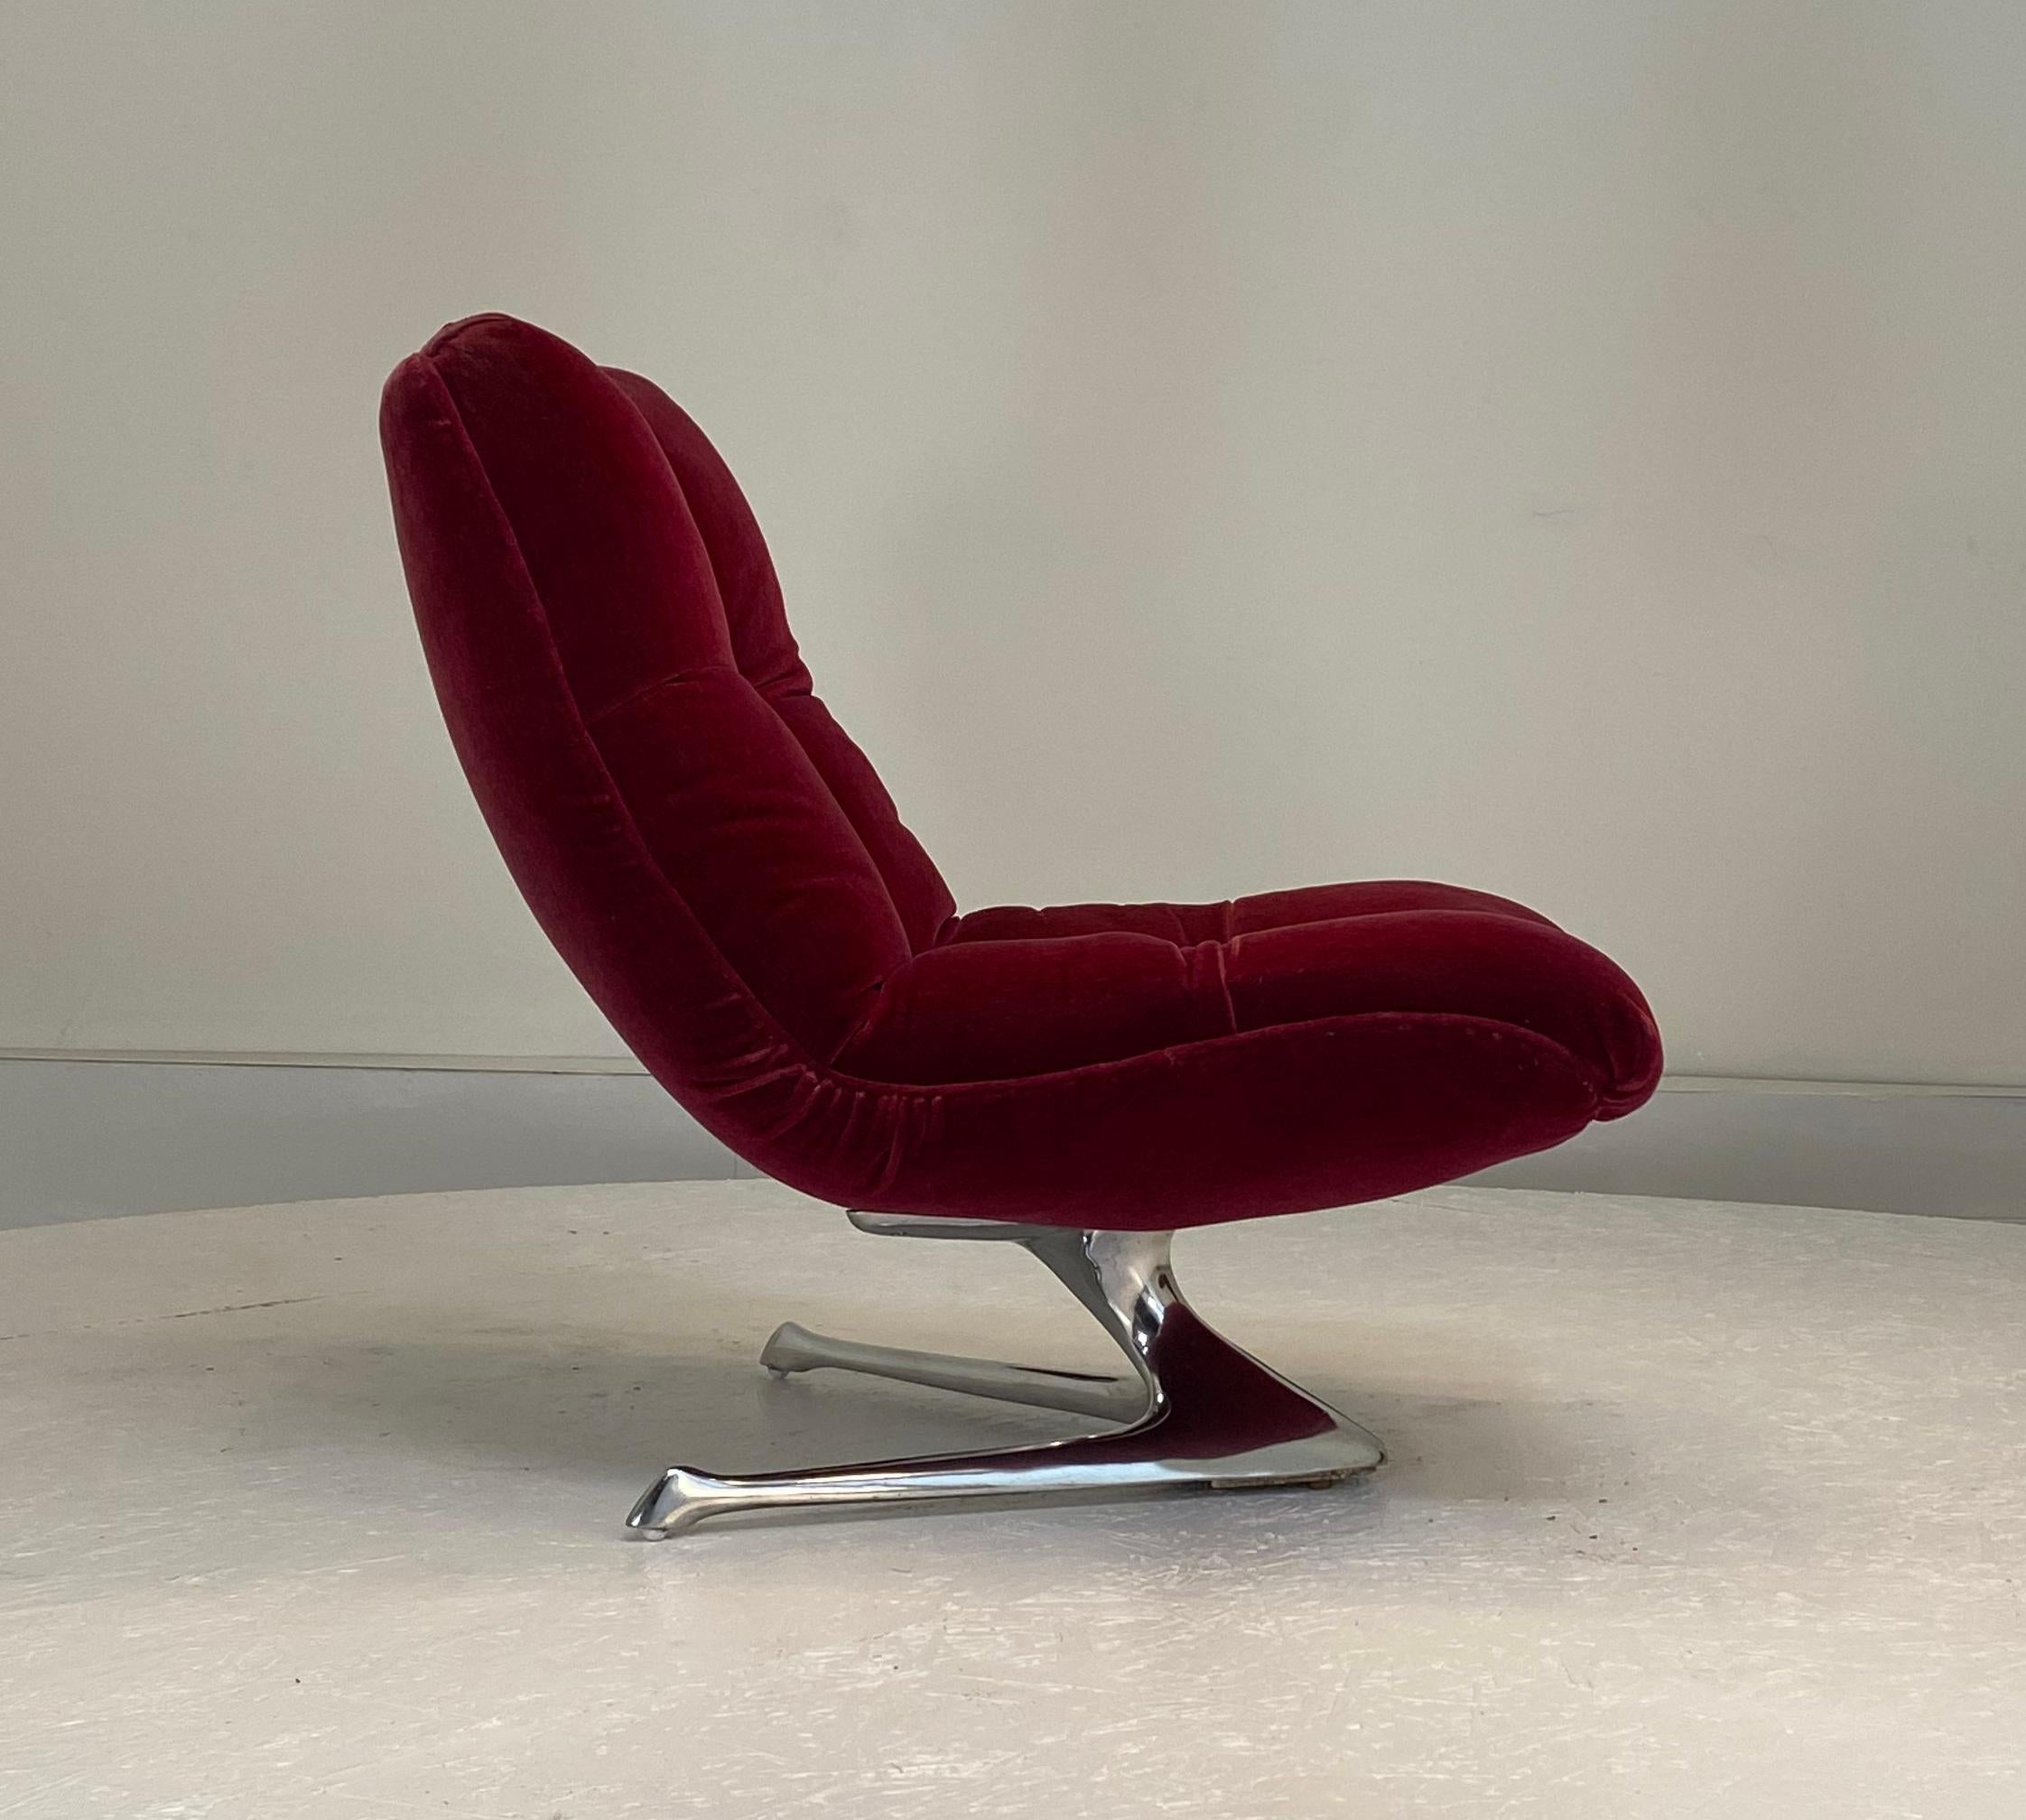 Pair of original unicorn lounge chairs by Vladimir Kagan Studios 1963. Each retains original upholstery (mohair) that will need replacement due to tears and age. Aluminum is in excellent condition with minor wear.
Measure: 35